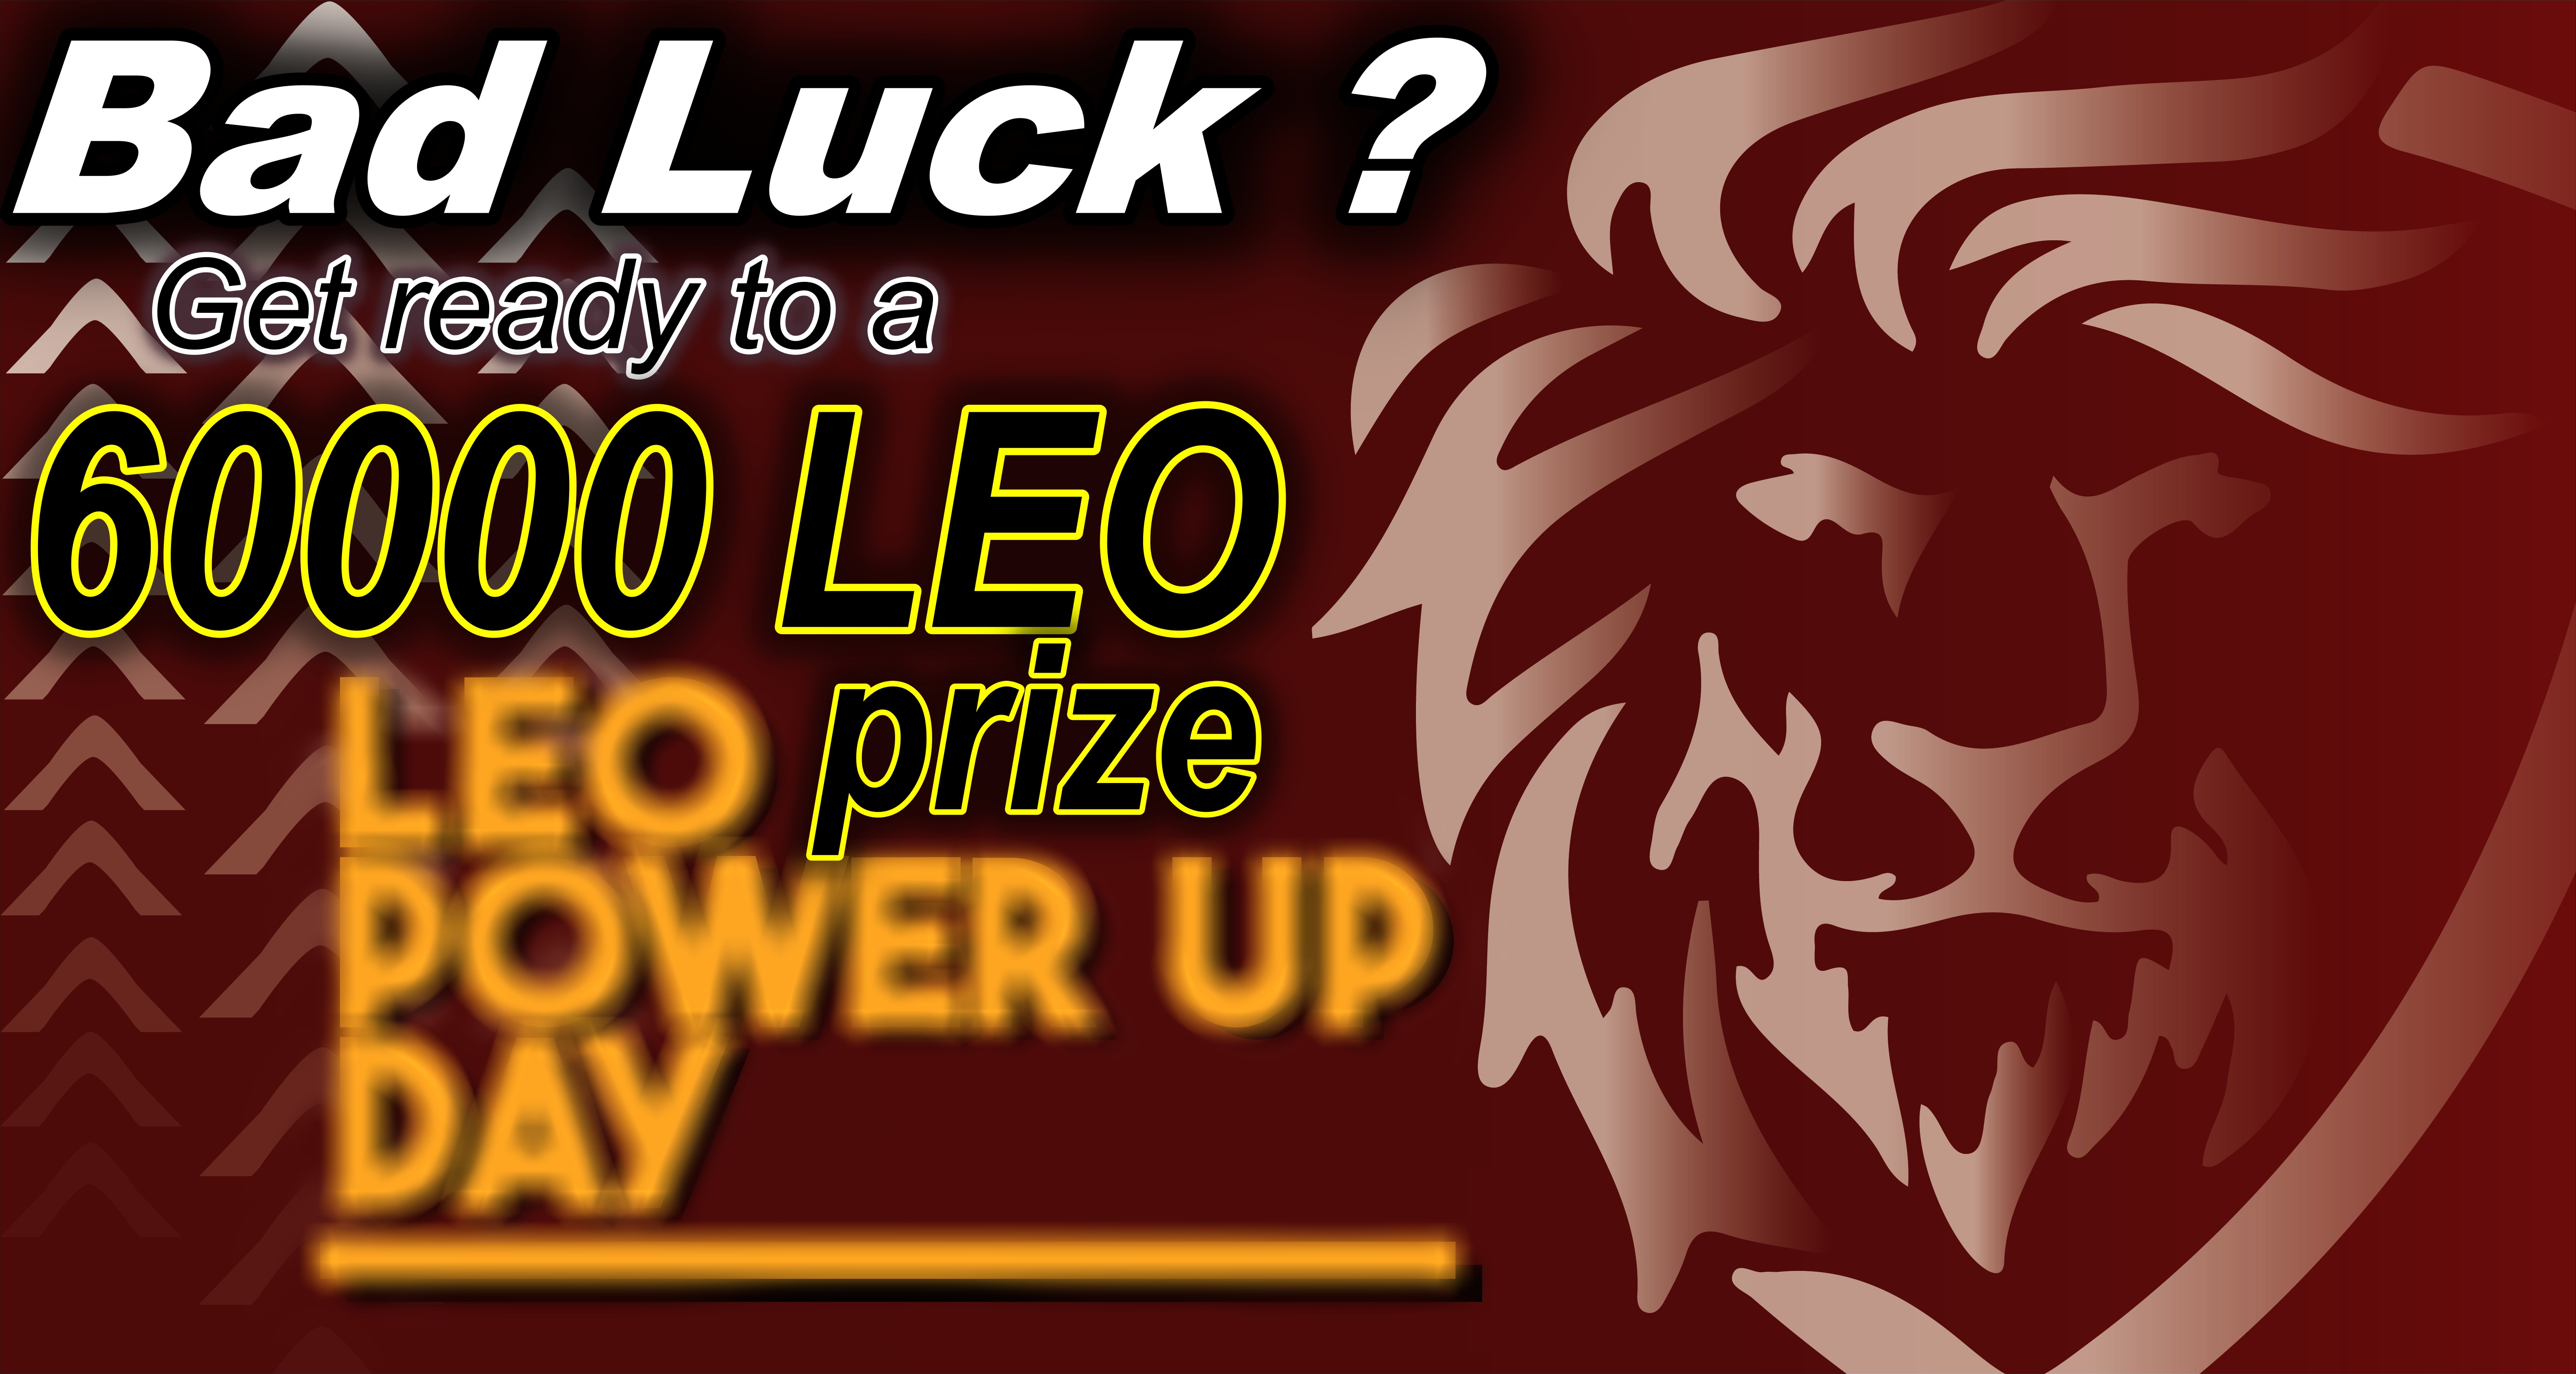 @onealfa/leo-power-up-day-insurance-bad-luck-prize